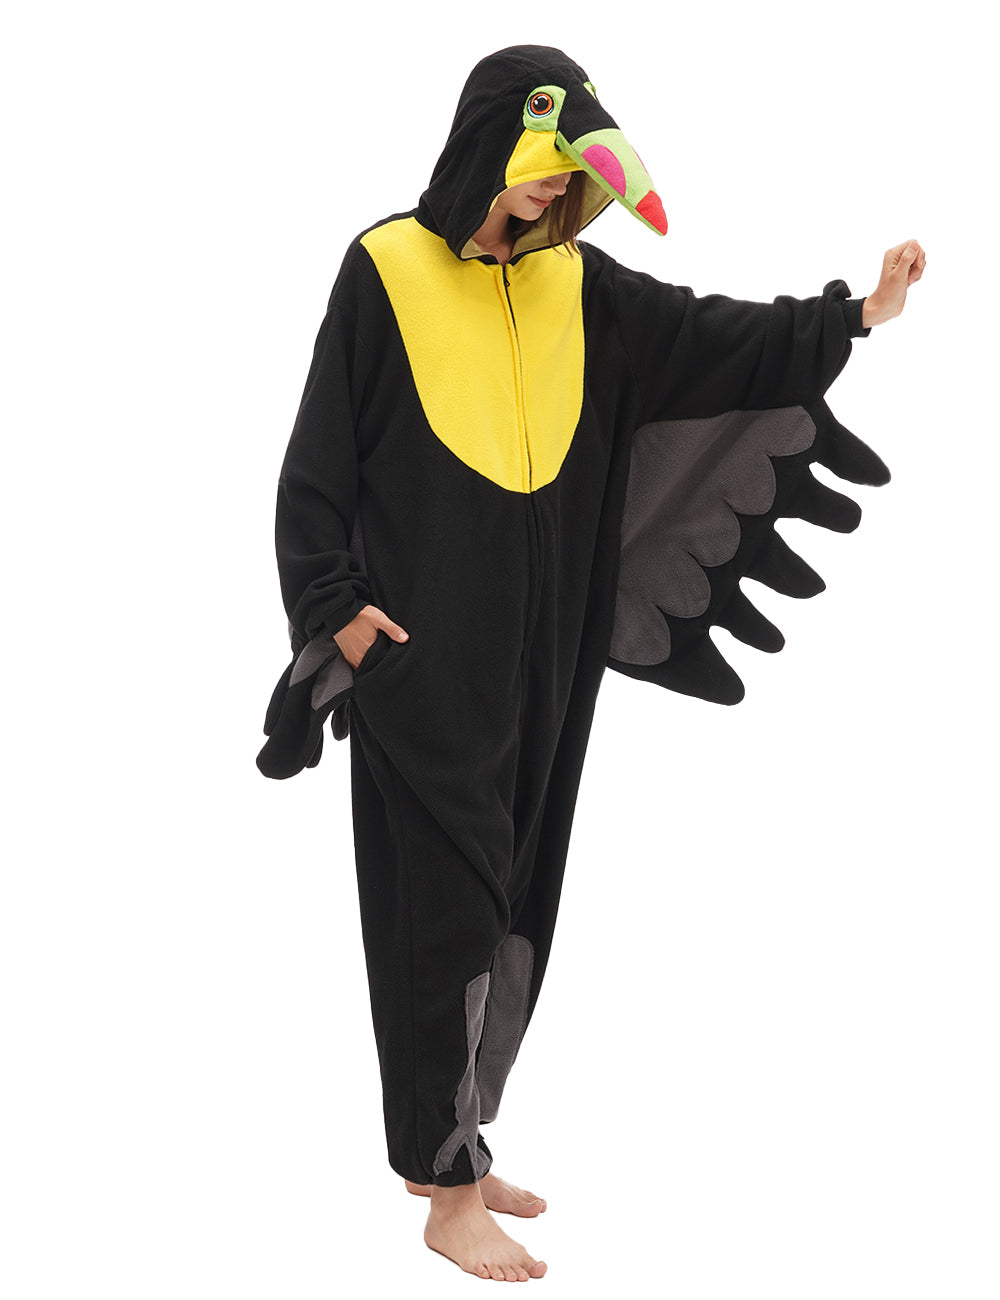 Dive into Cozy Paradise: Introducing the Manta and Toucan Onesies!